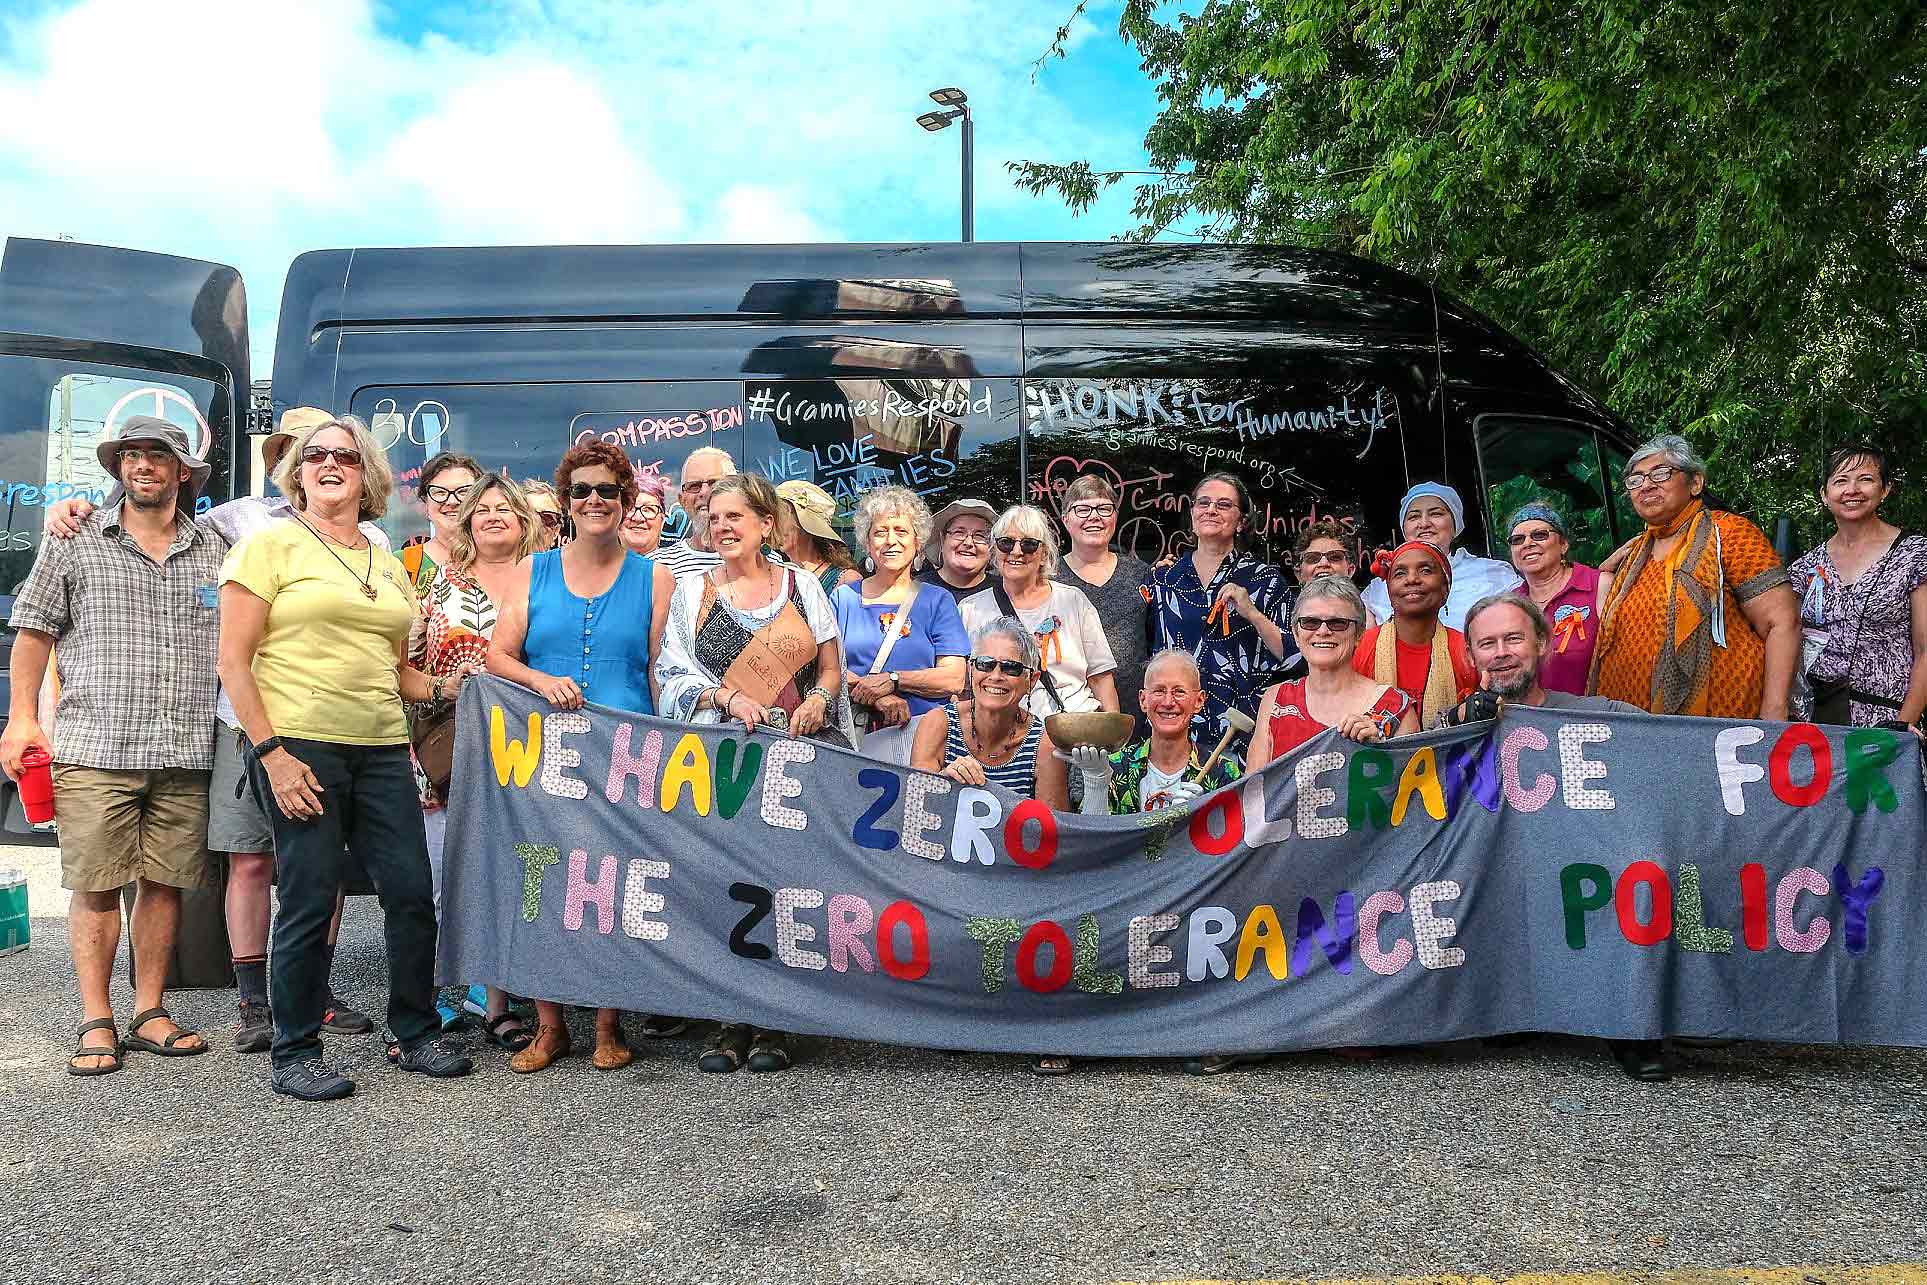 Large group shot of people in front of a bus holding a banner that reads: We have zero tolerance for the zero tolerance policy